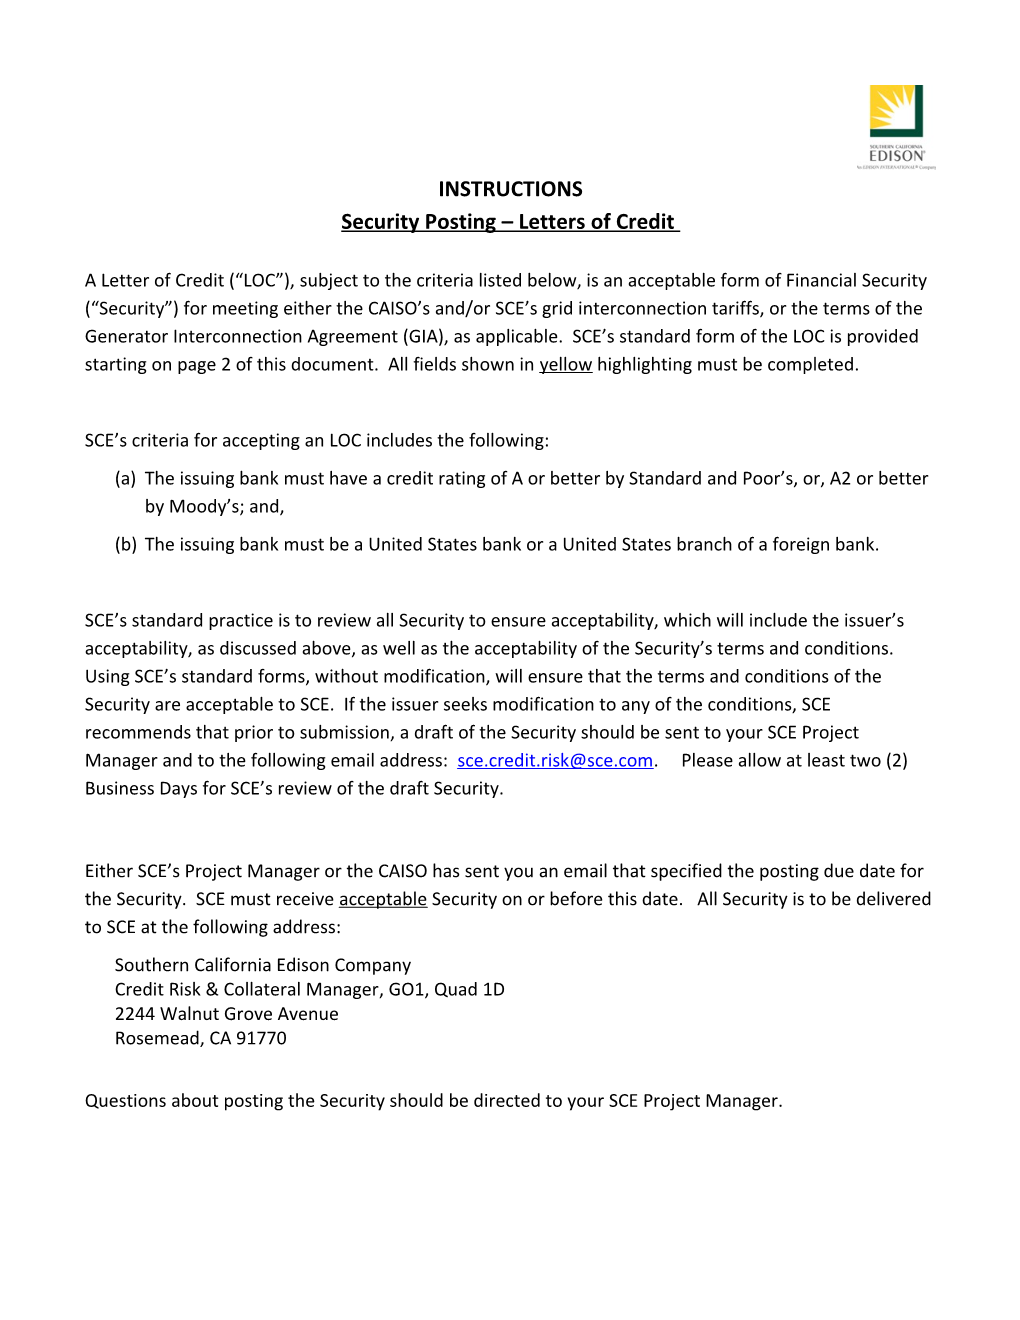 Letter of Credit - SCE